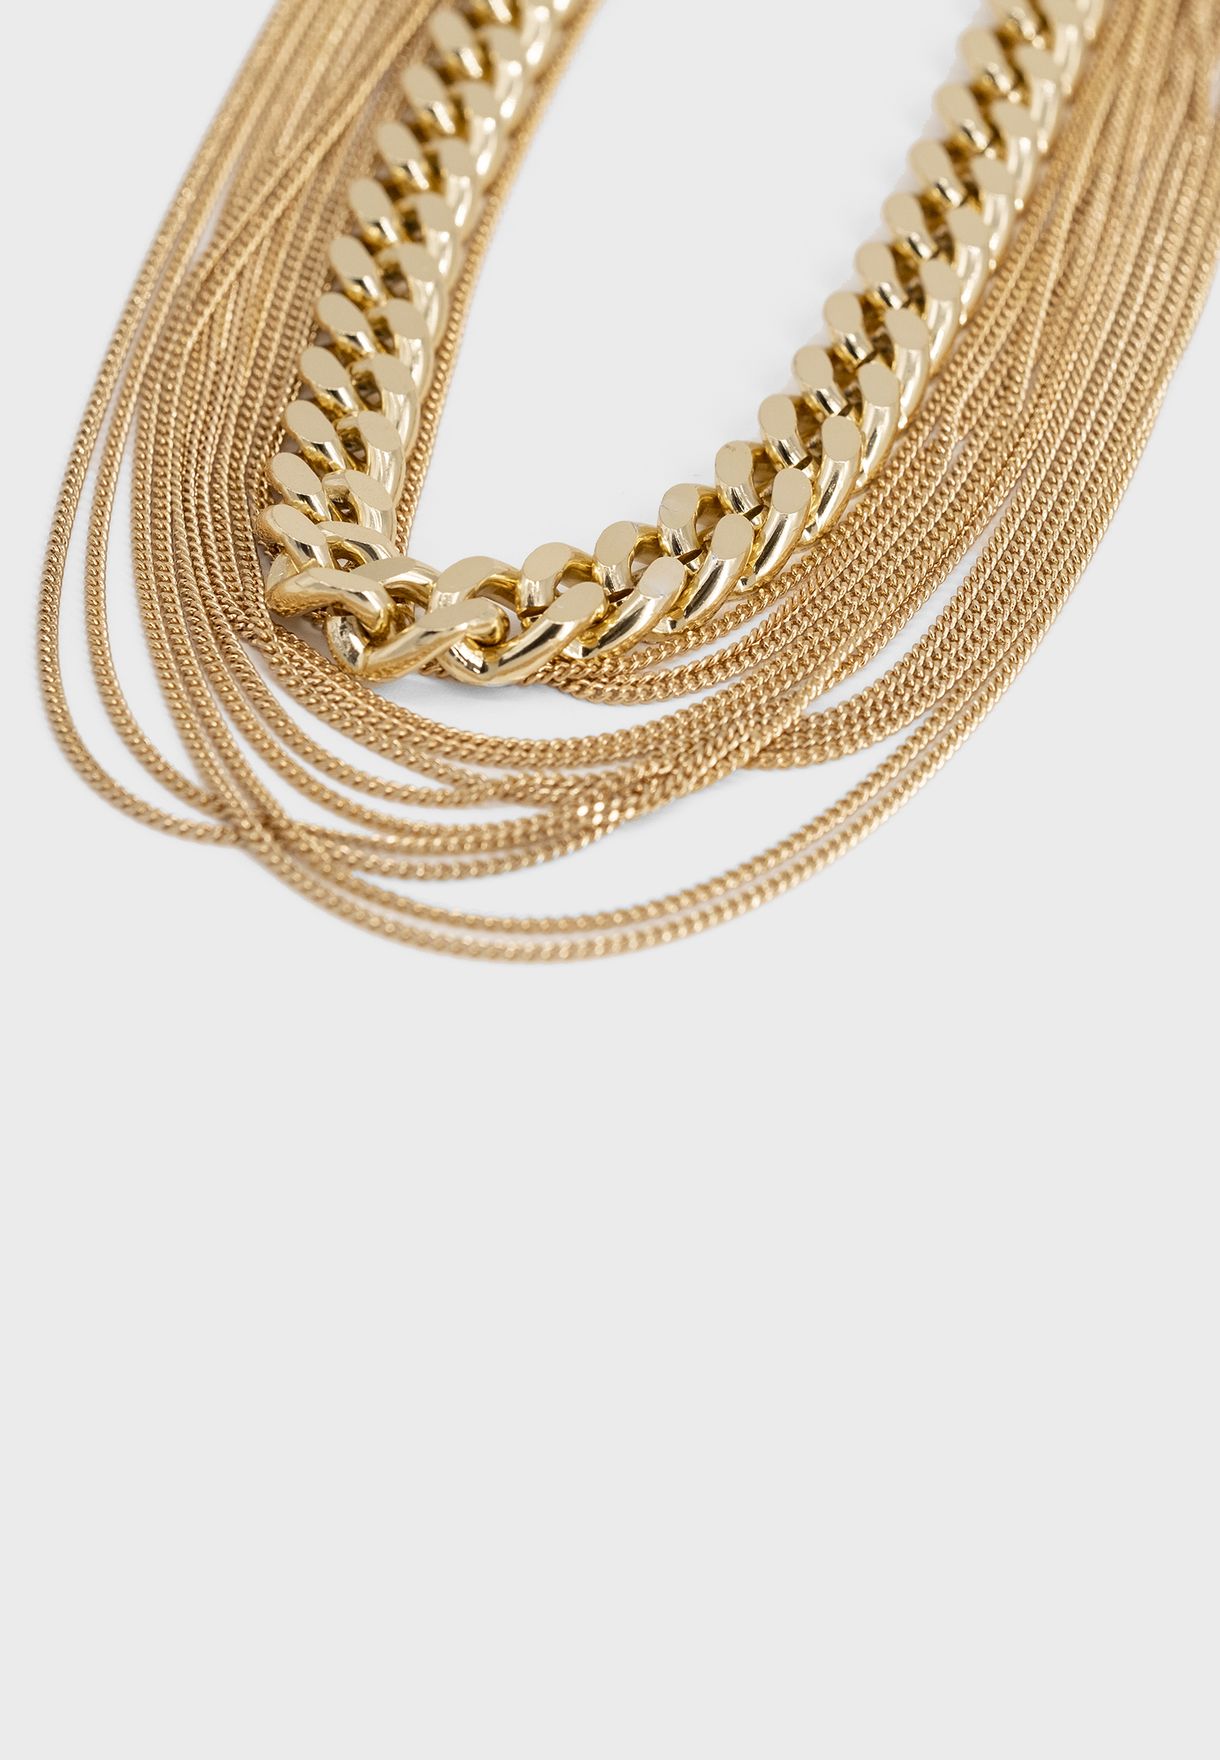 Multi Layered Necklace